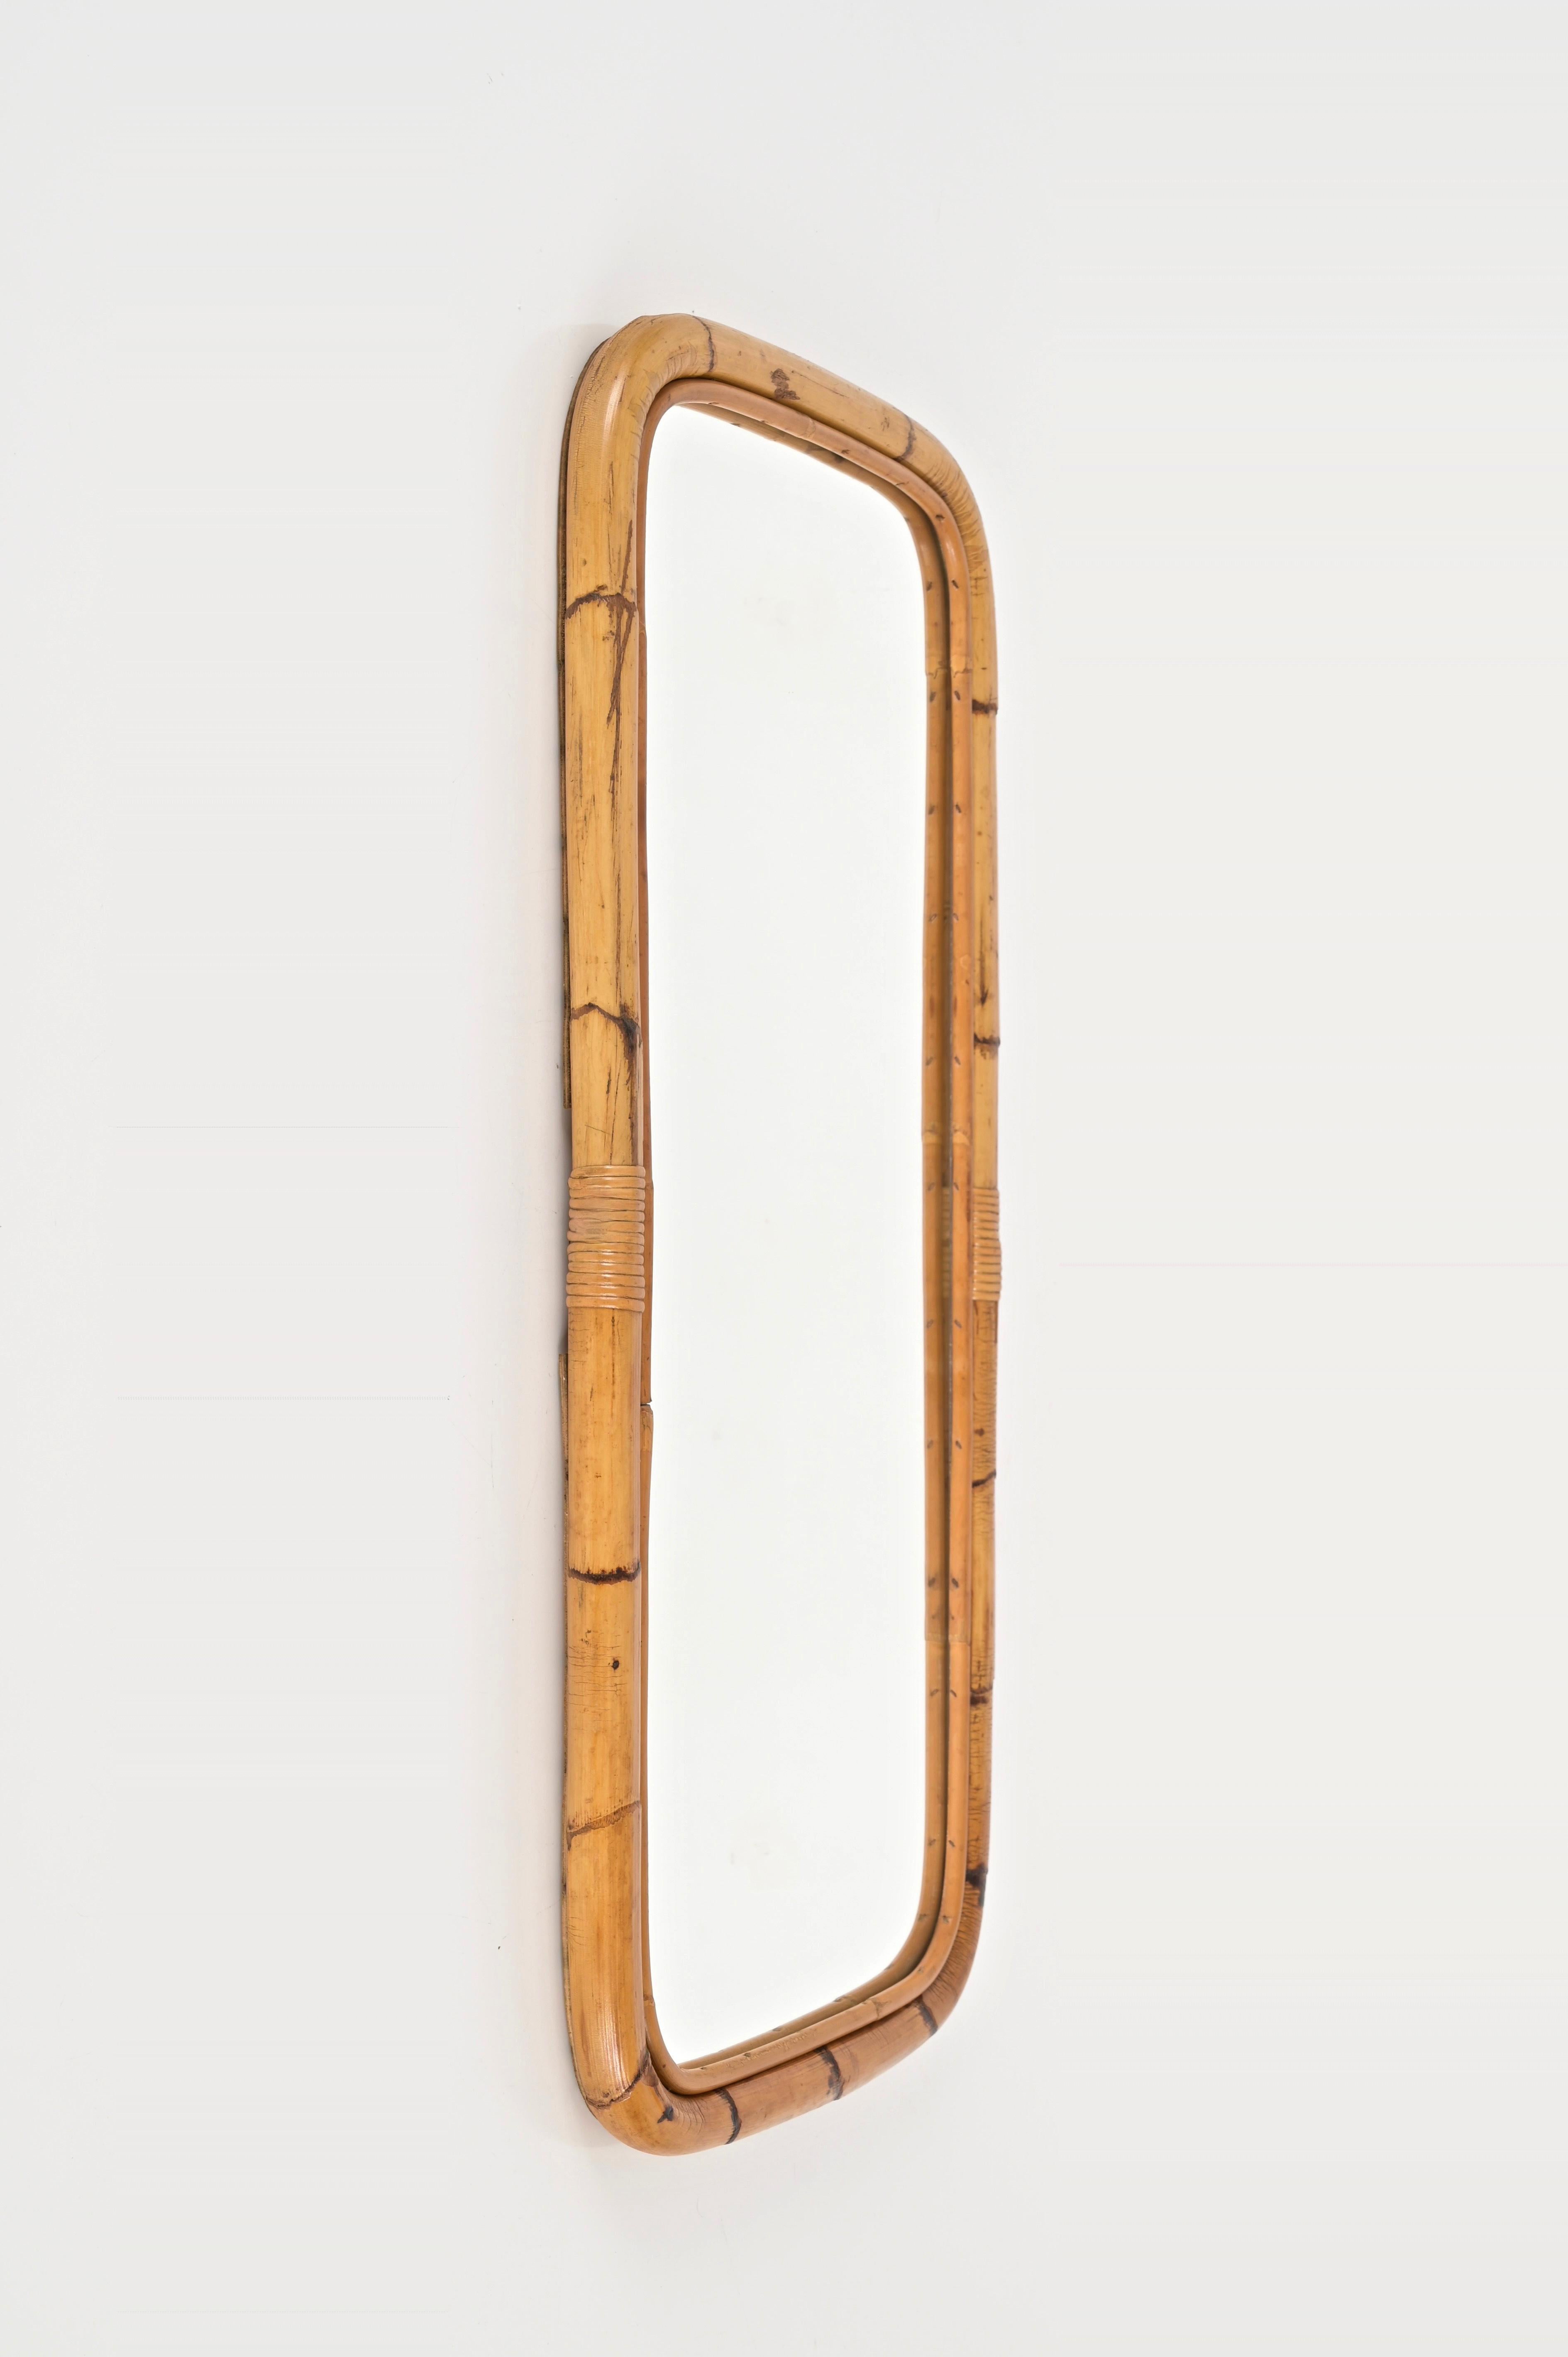 Hand-Crafted Mid-Century Italian Rectangular Mirror in Curved Bamboo, Rattan and Wicker, 1970 For Sale